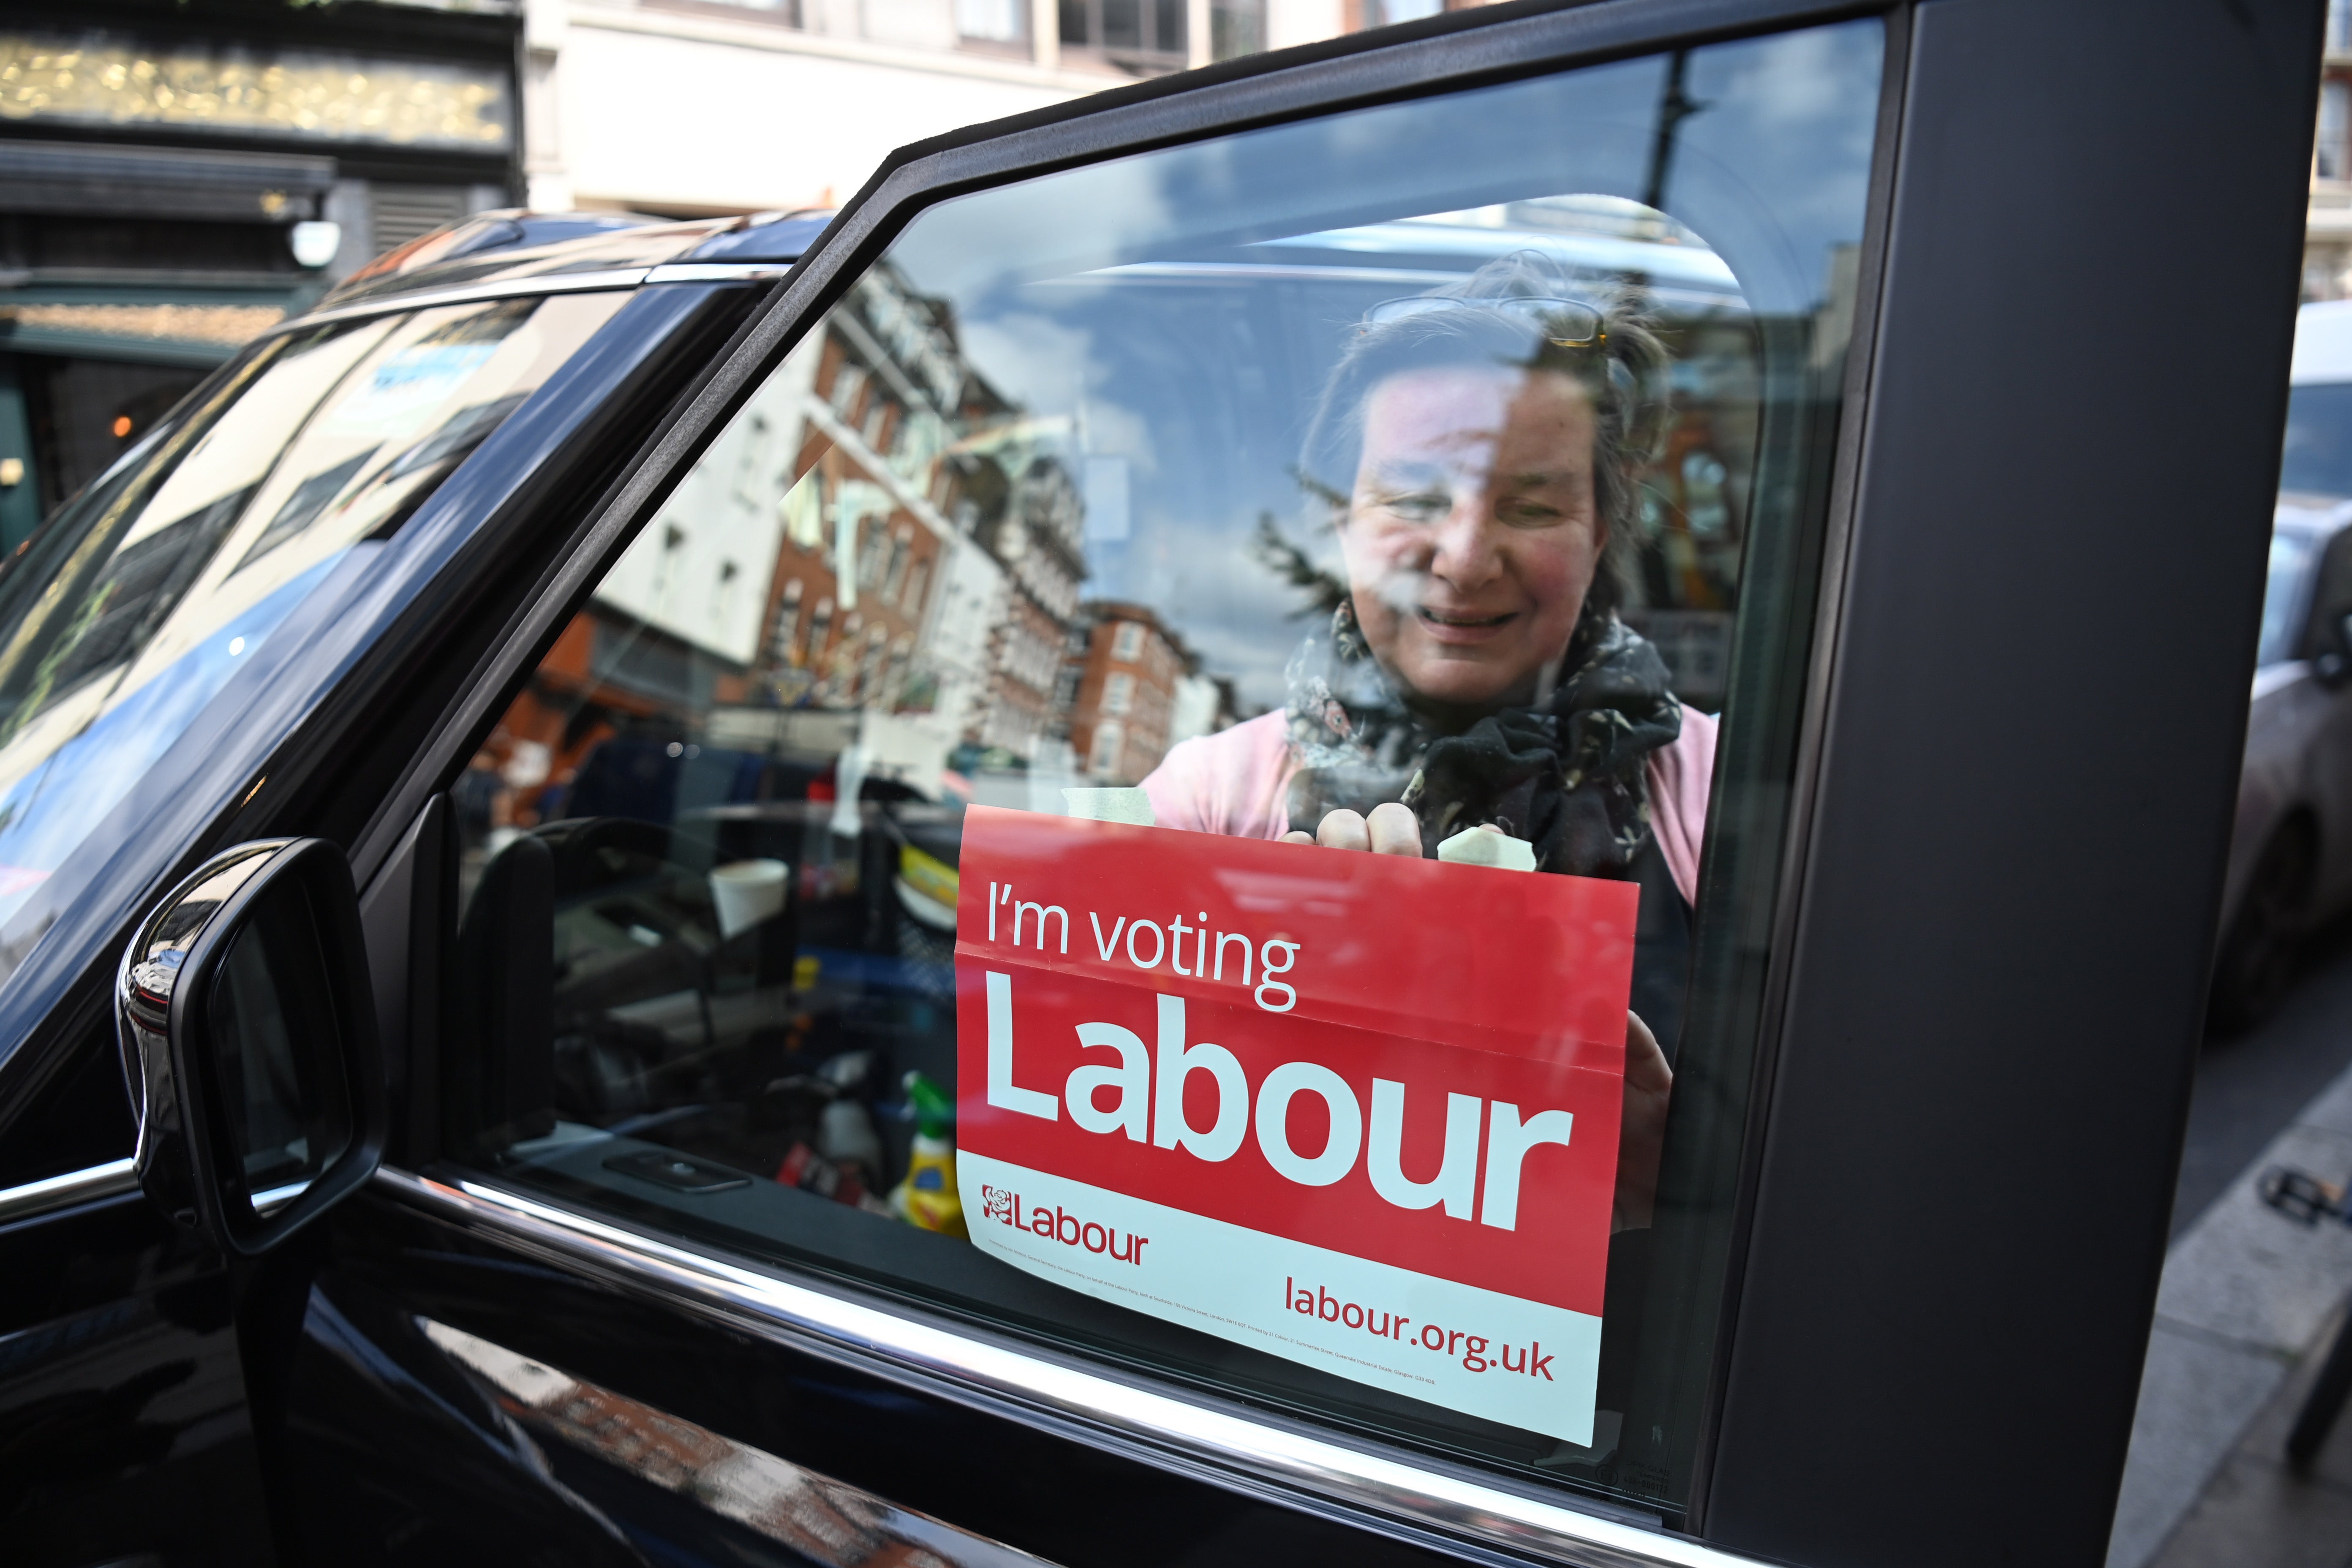 A woman attaches a Labour Party sign to her taxi in London on 5 May